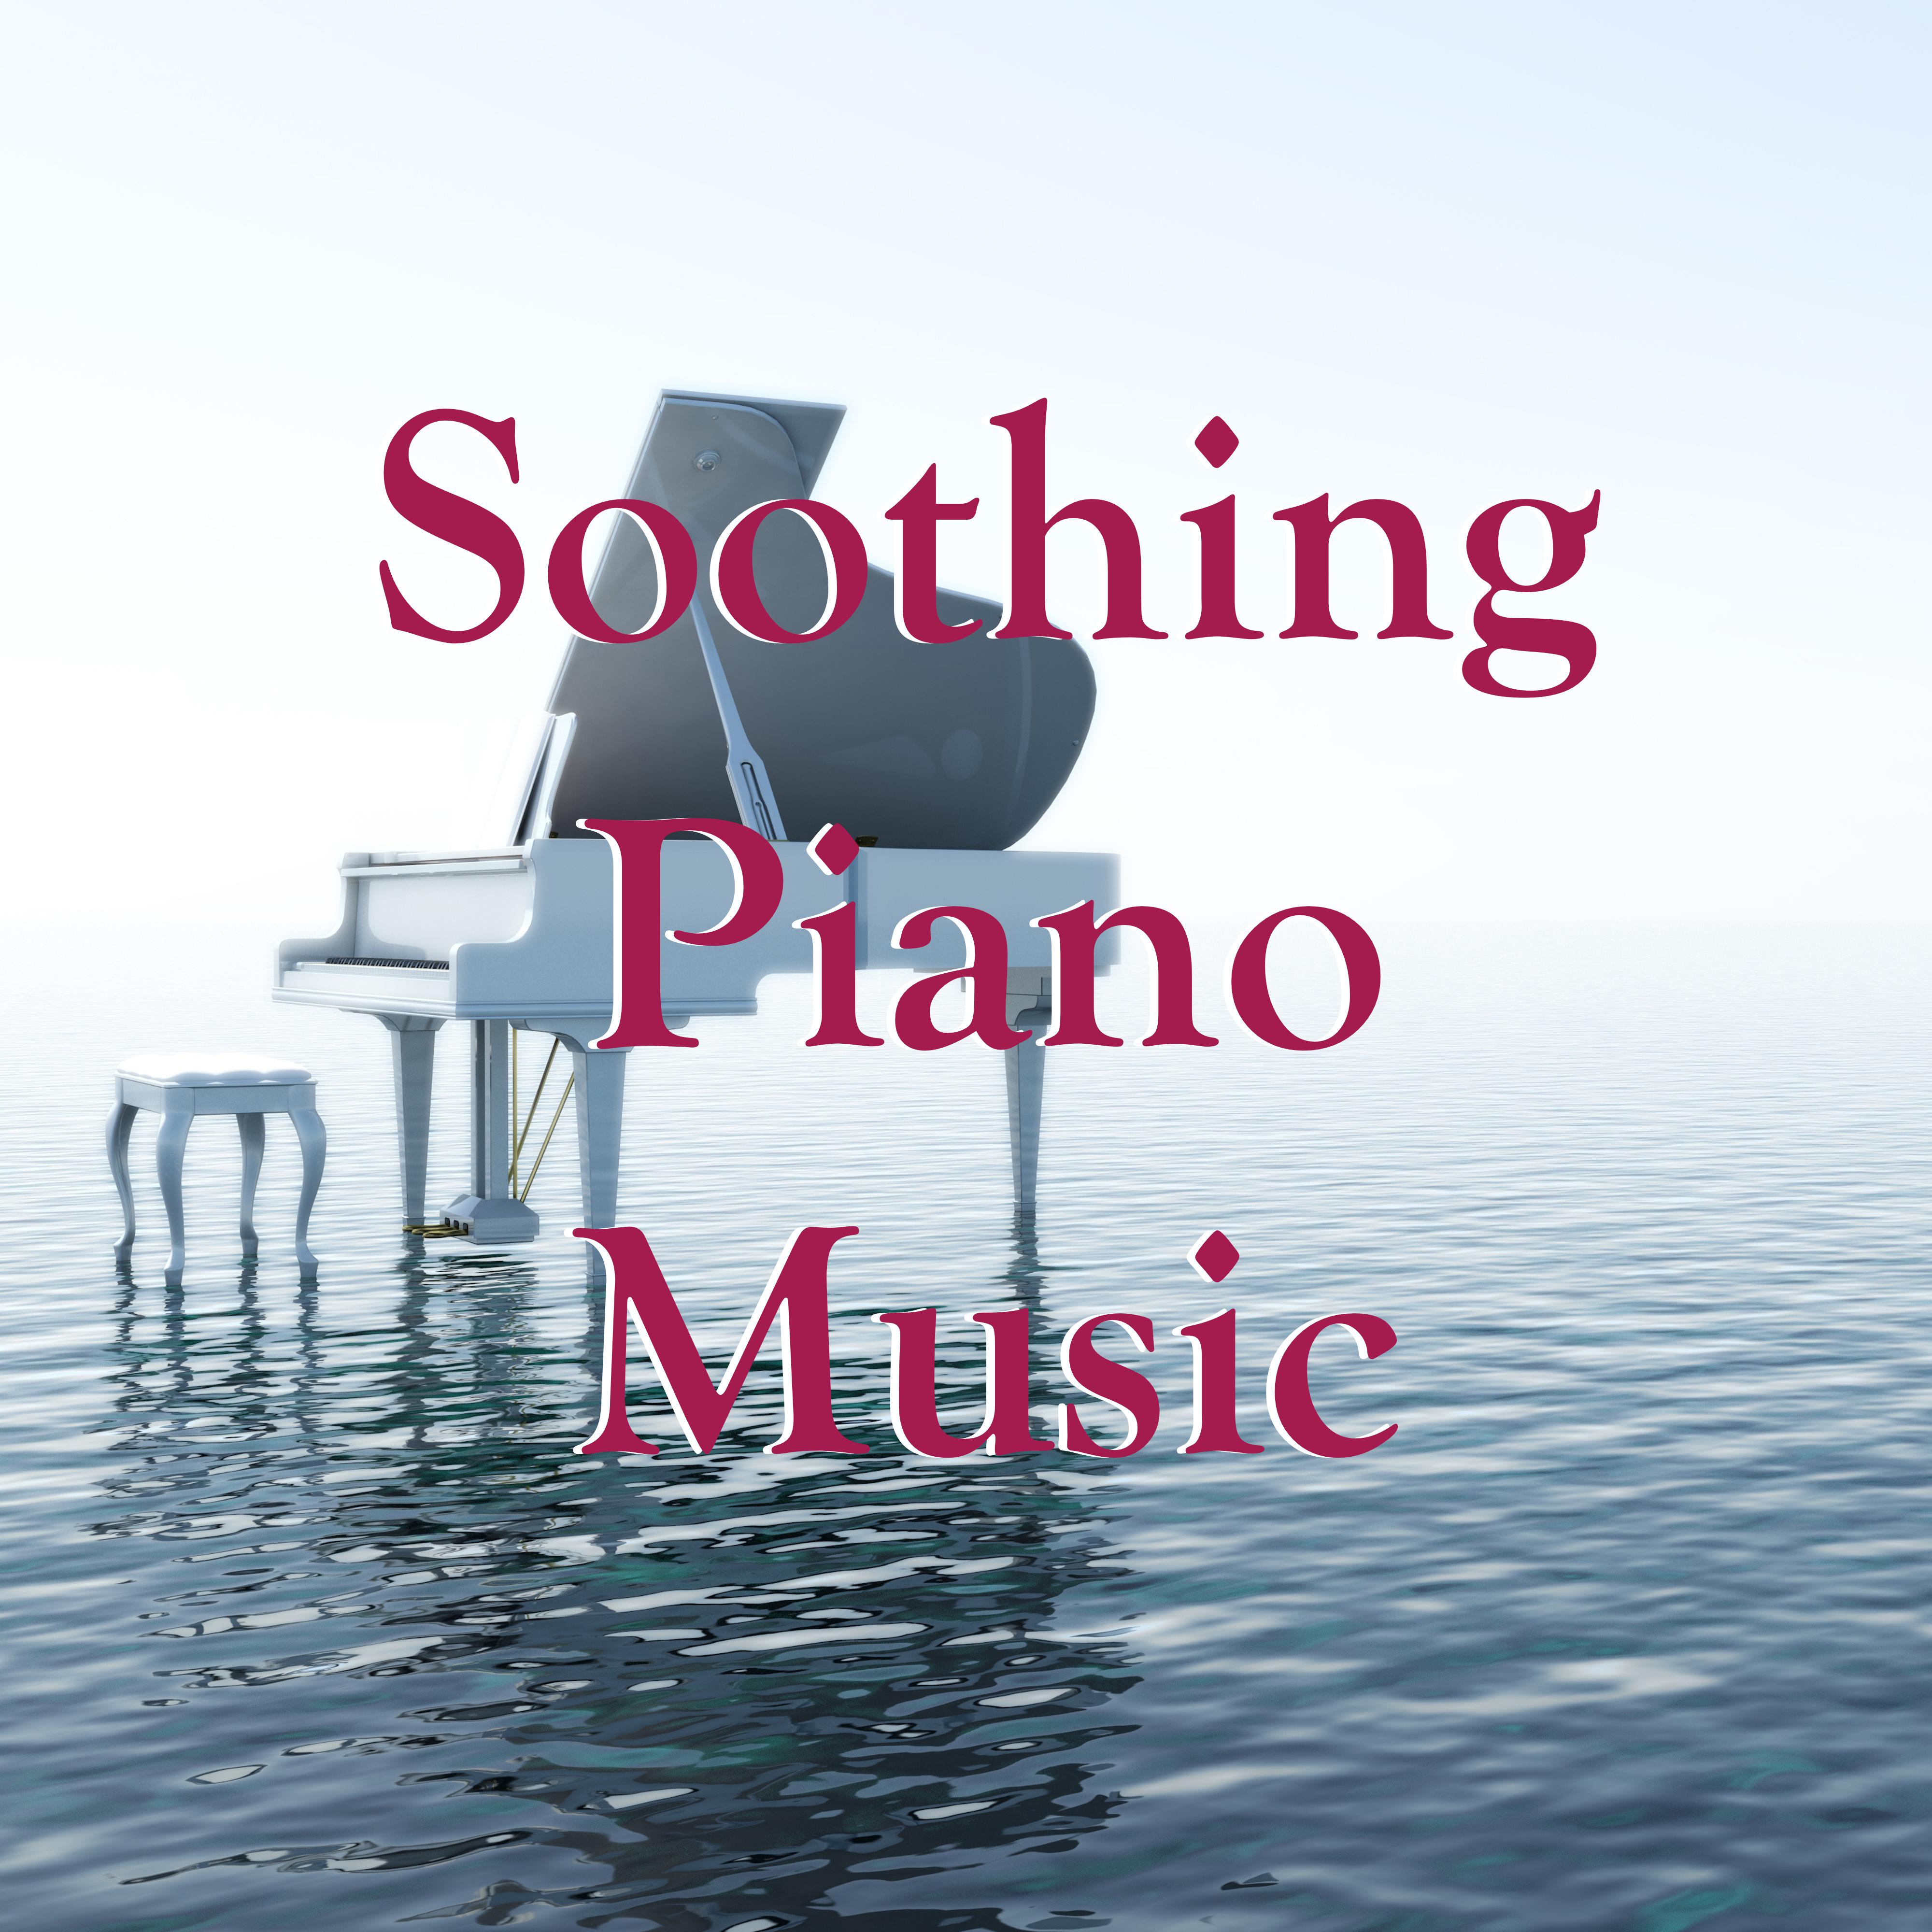 Soothing Piano Music - Instrumental Piano Songs to Relax